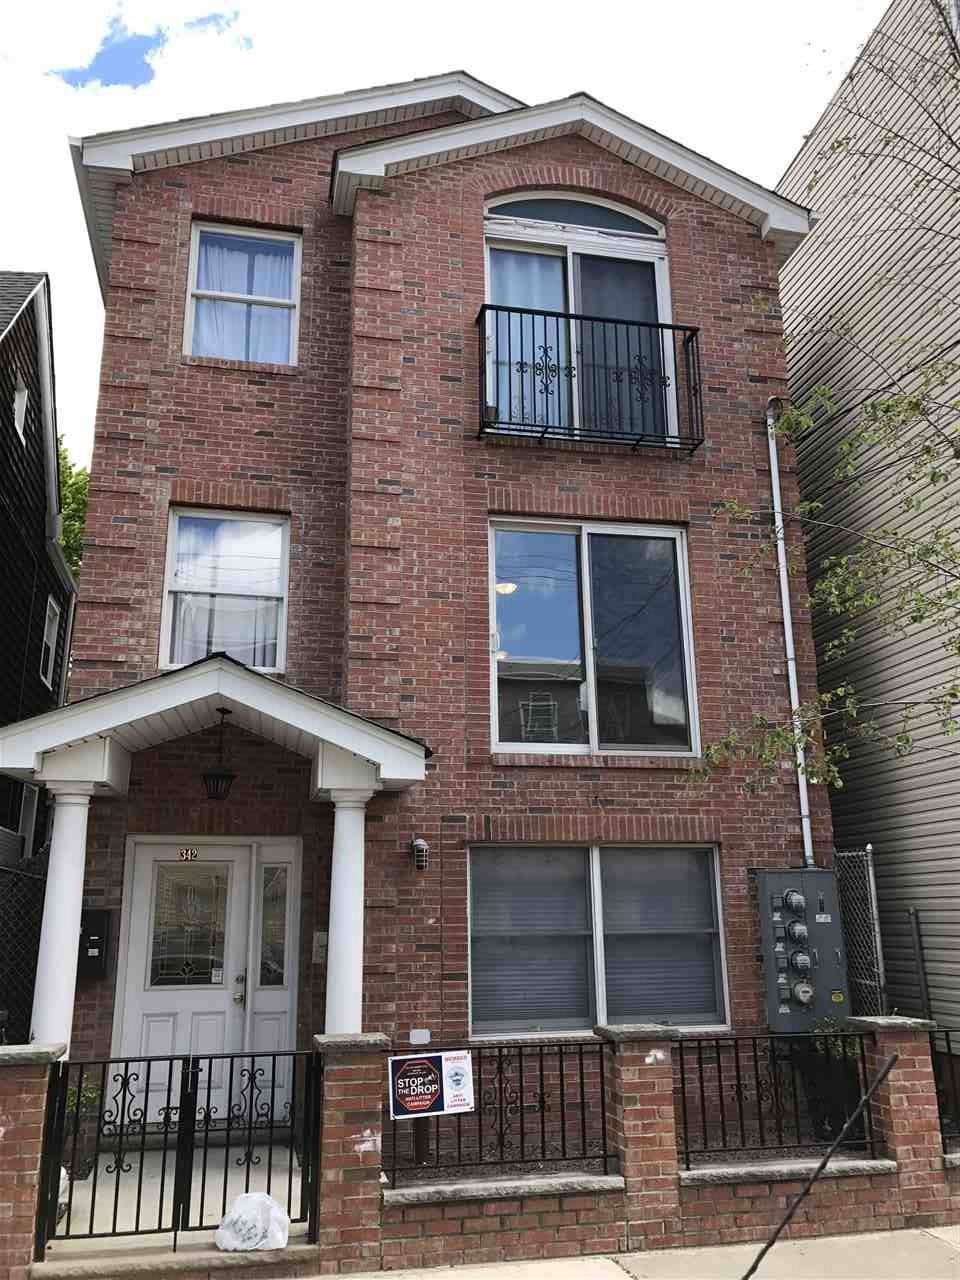 Well laid out 3bdrm/2bath in the middle of bustling Riverview Arts District